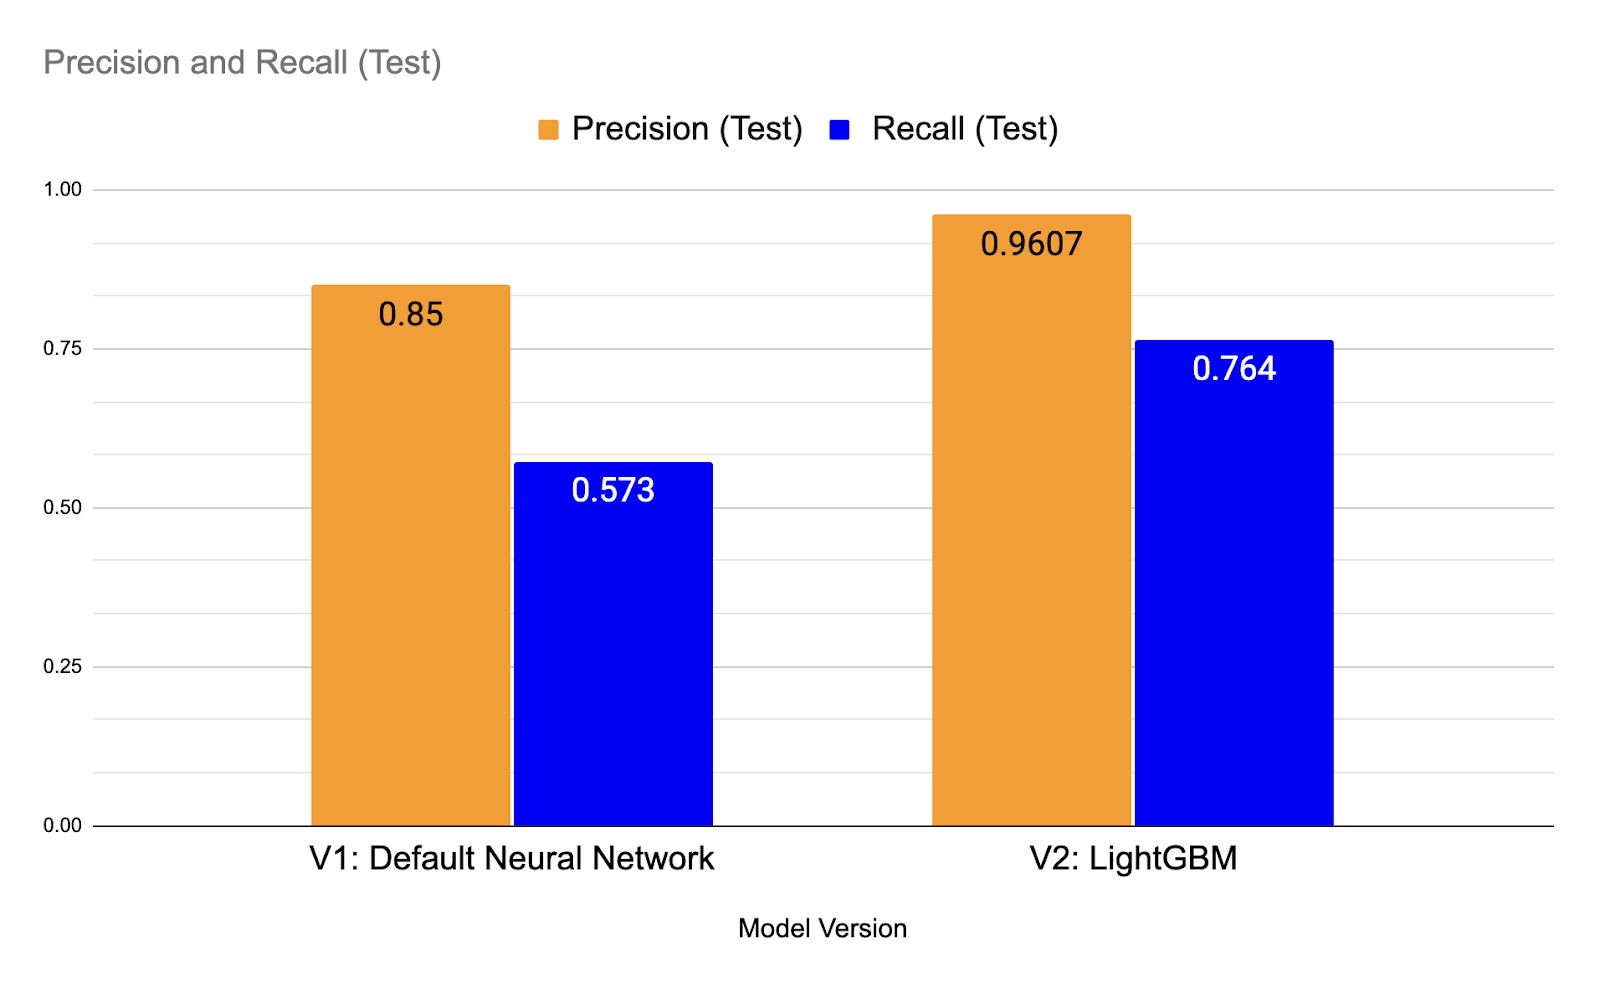 Comparing neural network and GBM model results